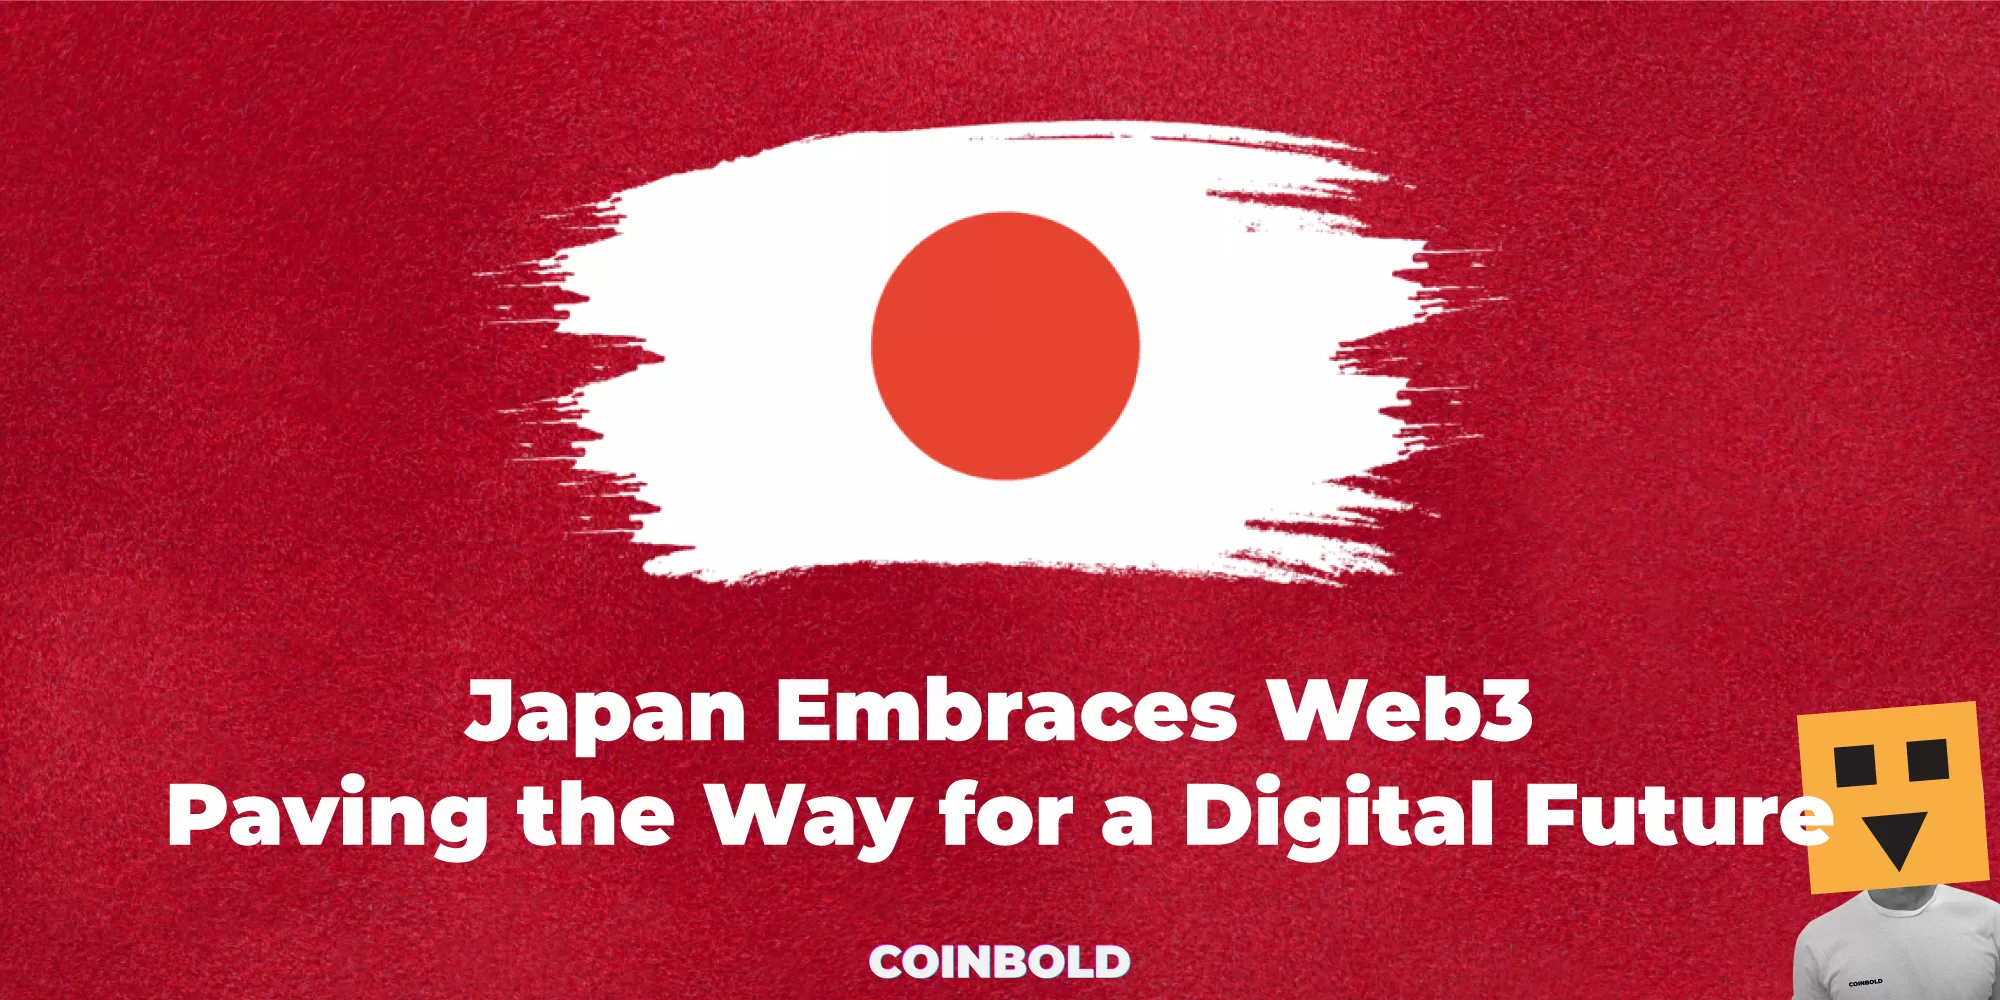 Japan Embraces Web3: Paving the Way for a Digital Future